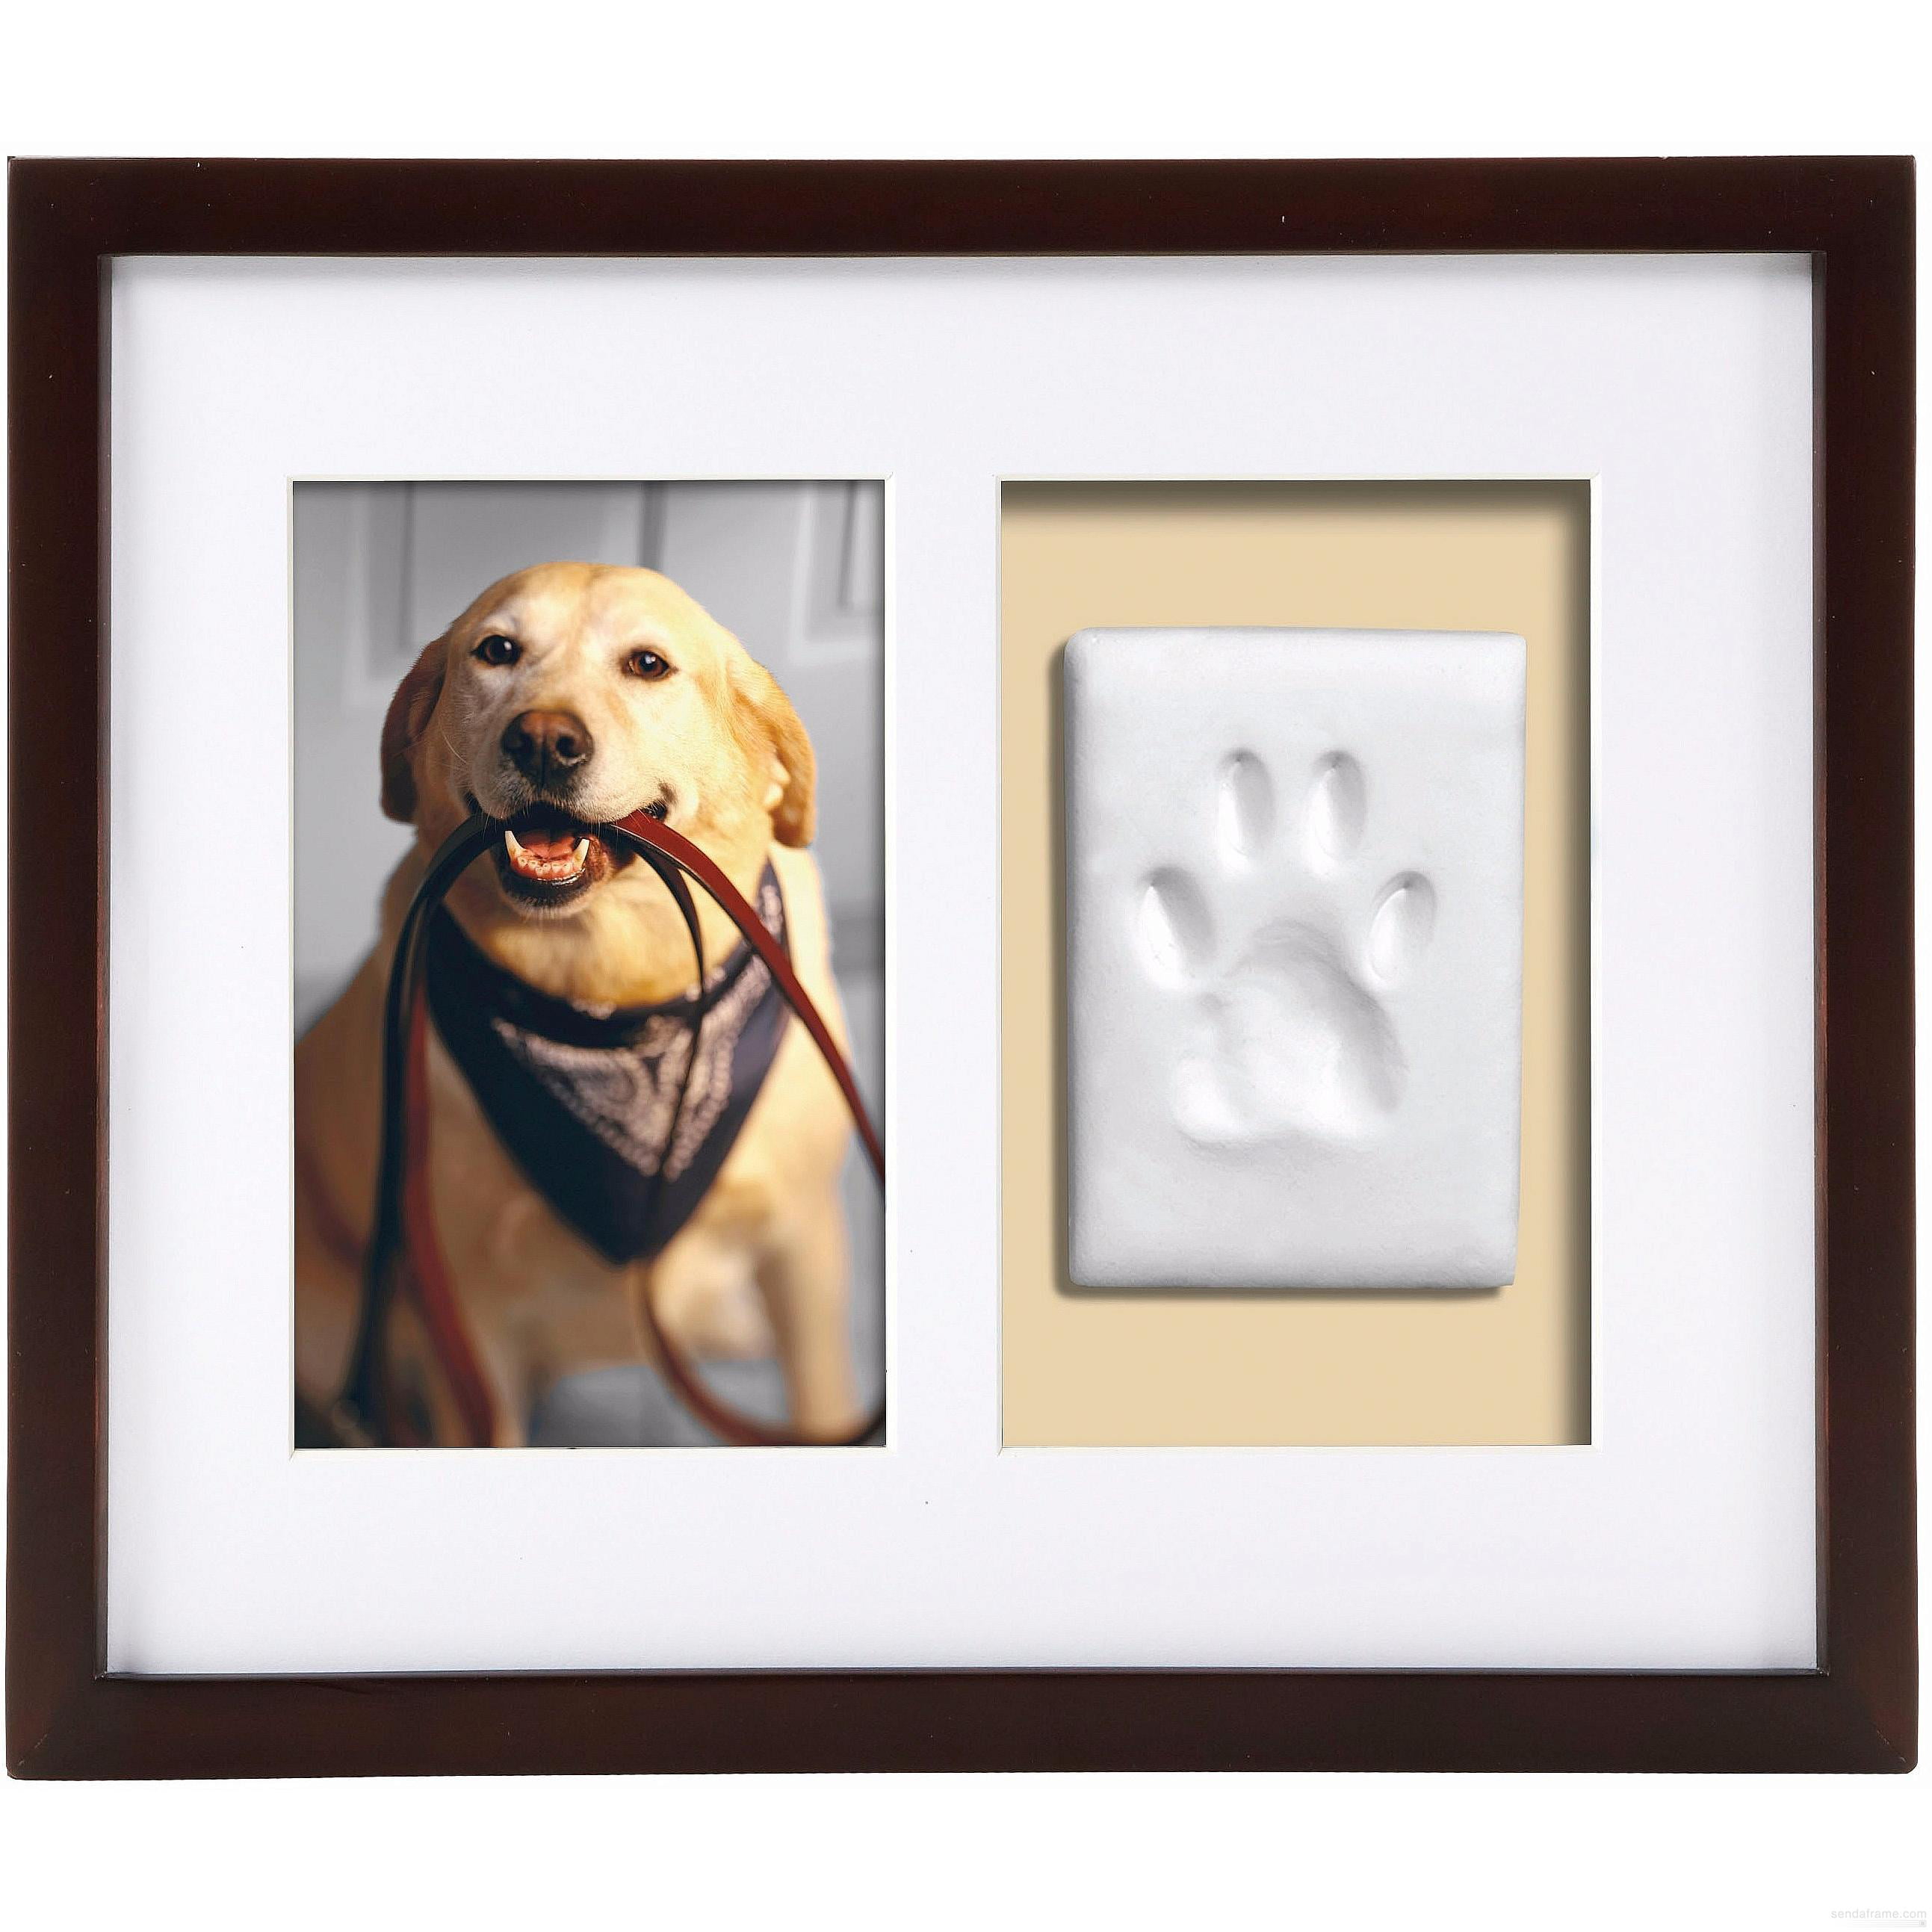 Memorial Clay Imprint Kit Better World Pets Paw Prints Keepsake Photo Frame Holds 4 x 6 inch Picture for Dogs and Cats Perfect for Pet Lovers